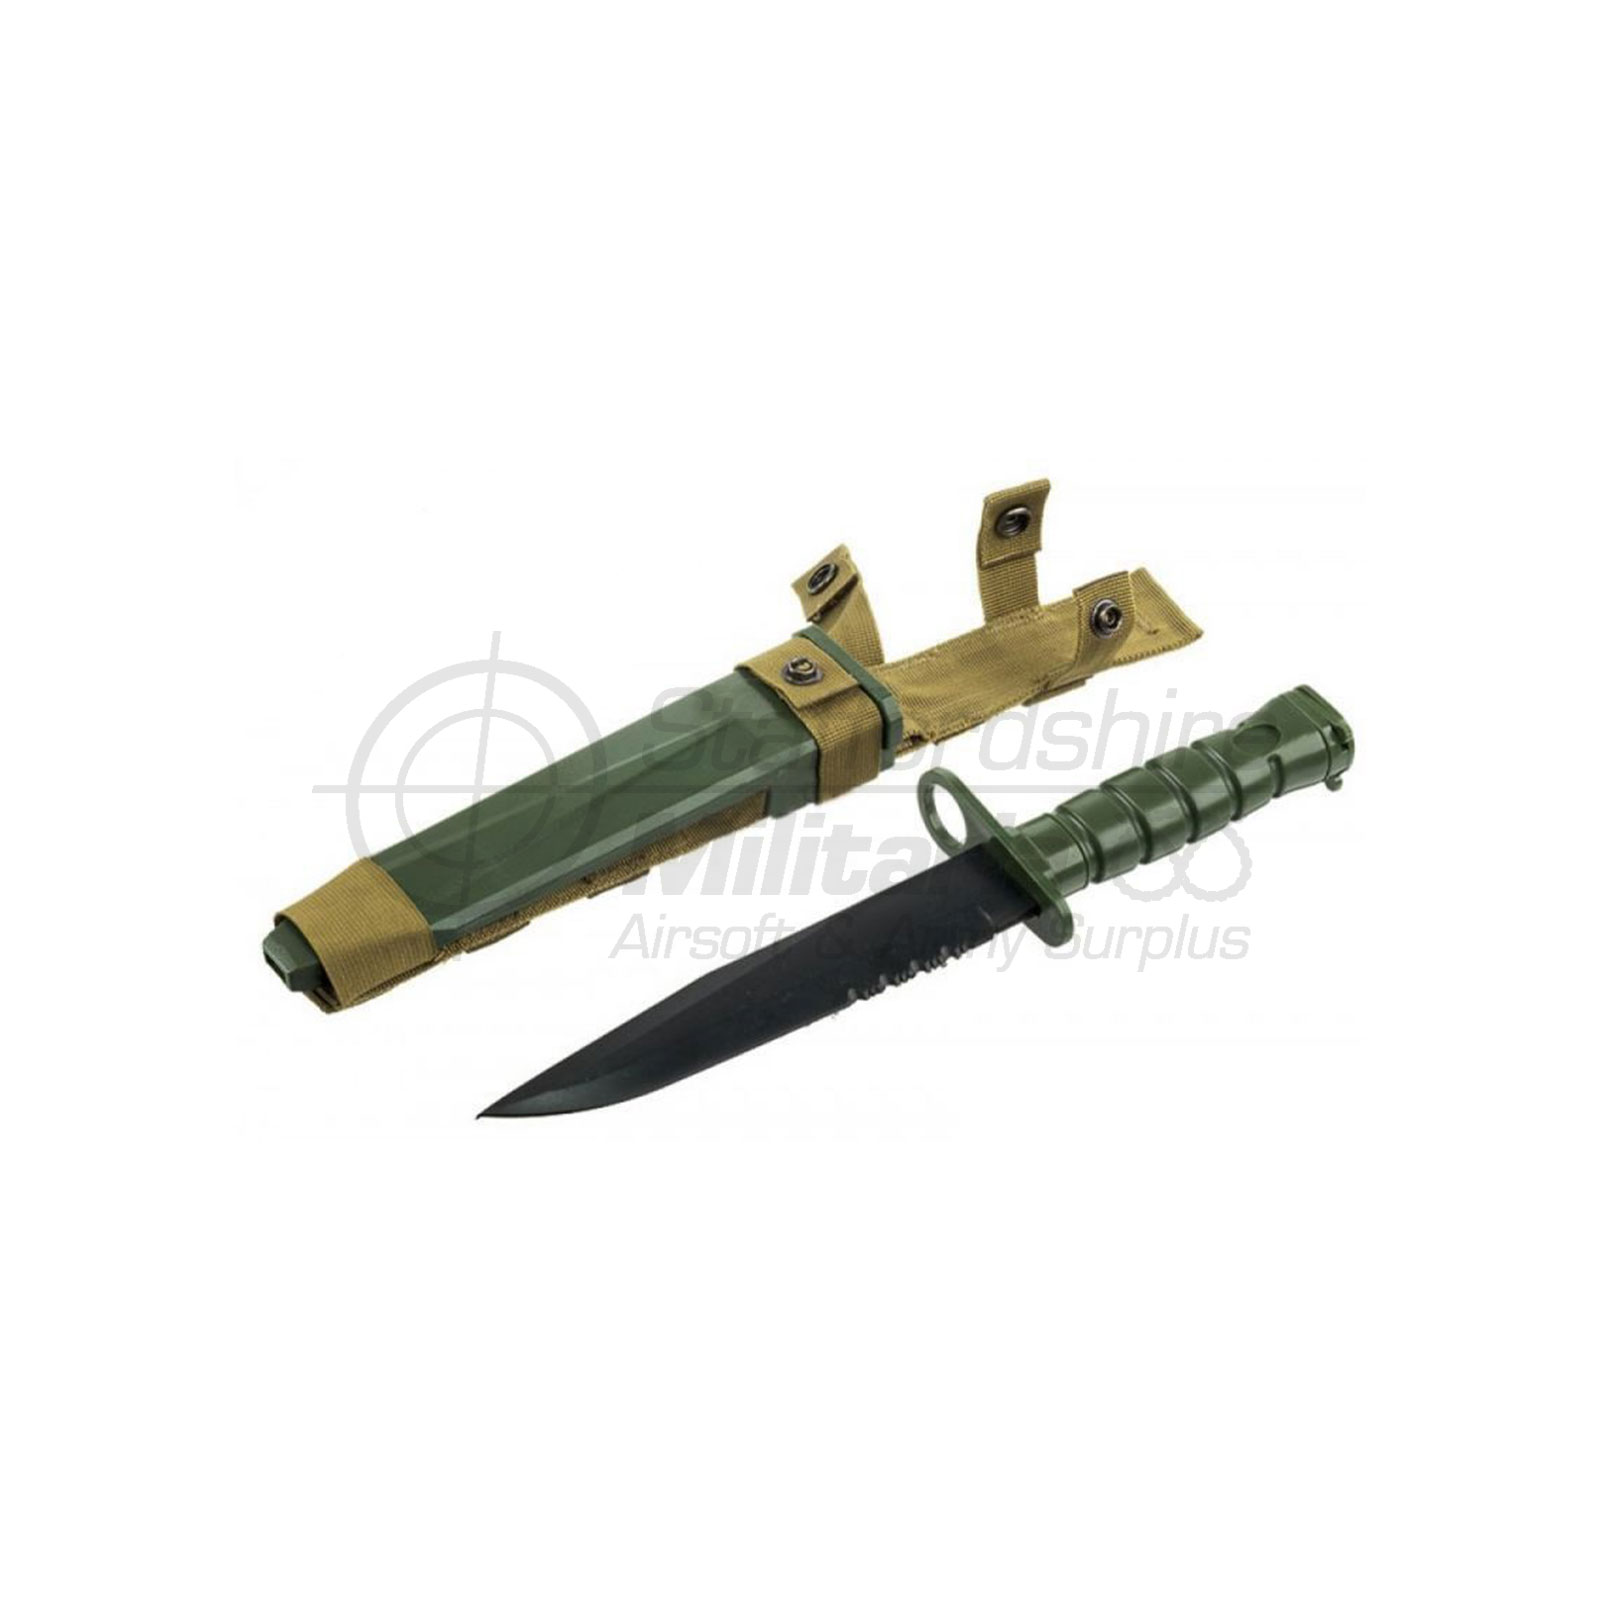 Airsoft Rubber M4 Bayonet Training Knife